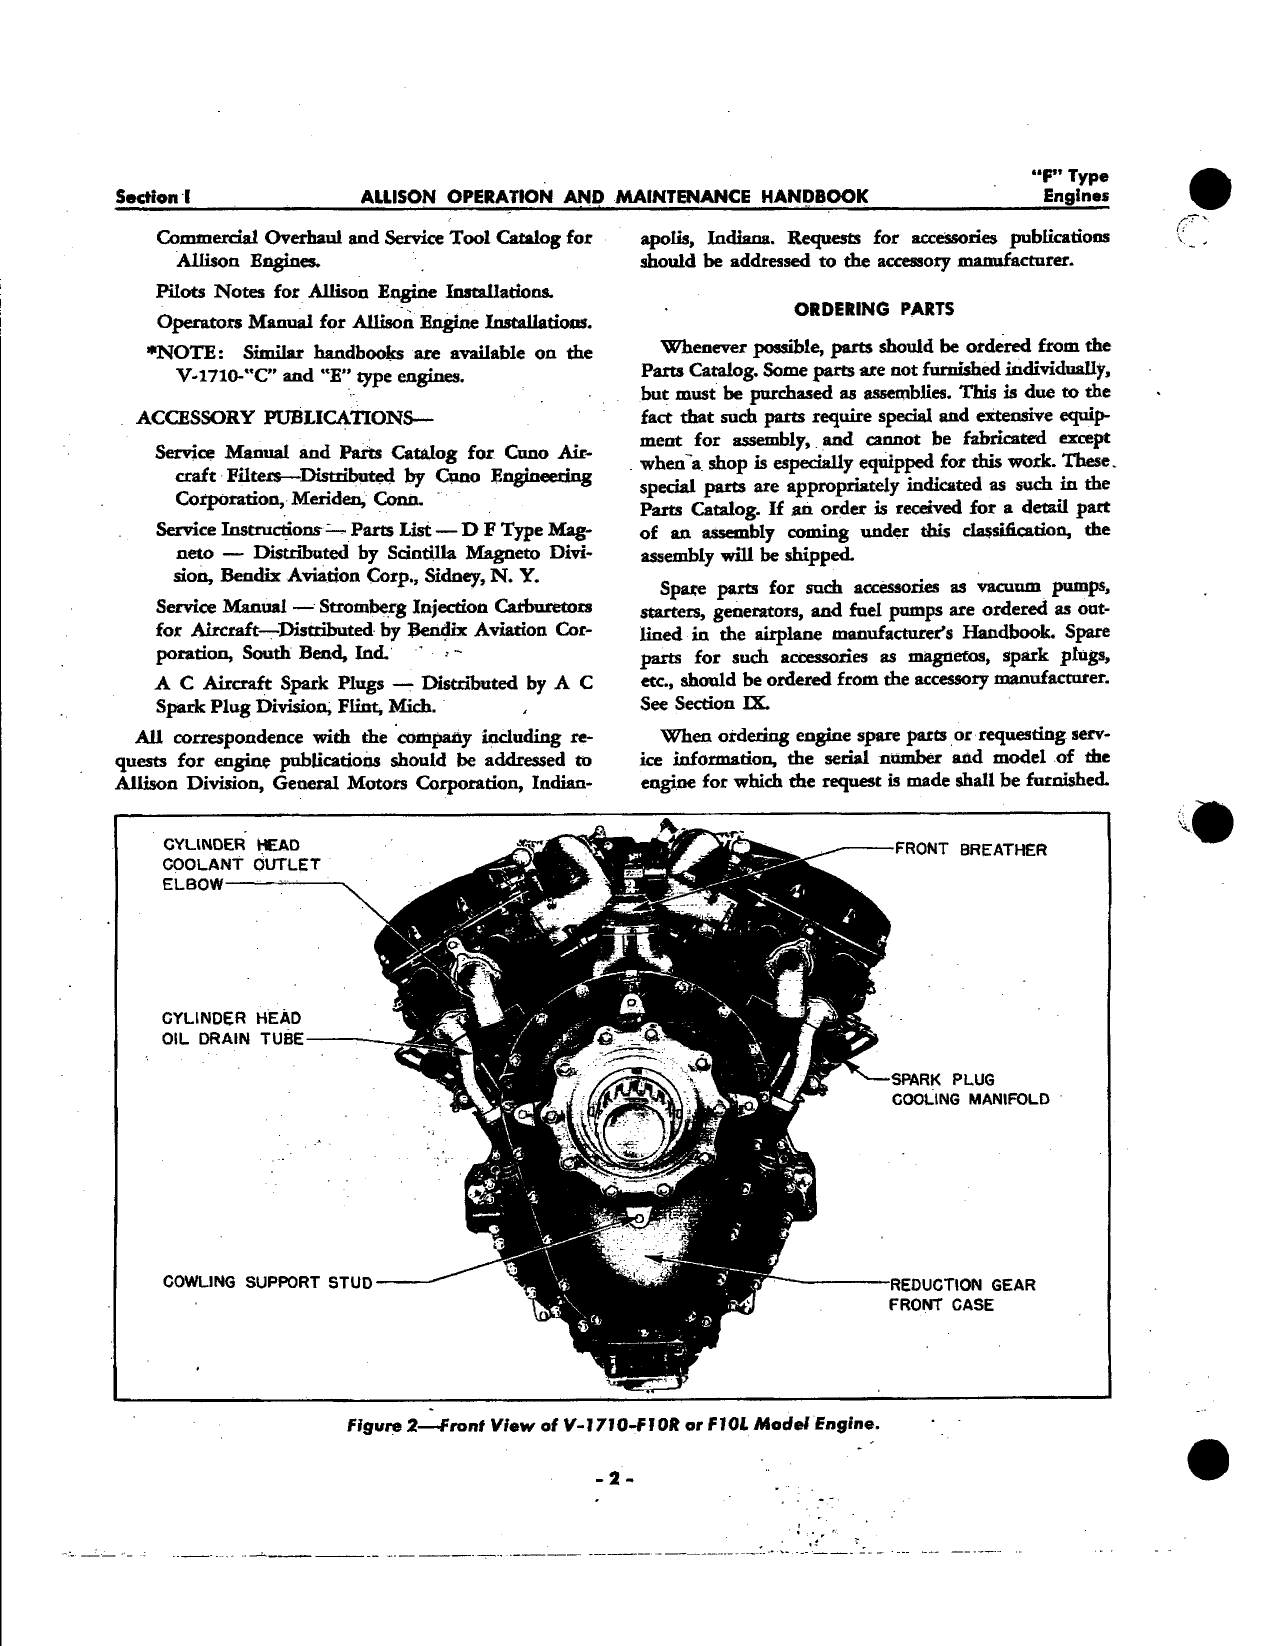 Sample page 8 from AirCorps Library document: Handbook of Operation and Maintenance for Allison V-1710 